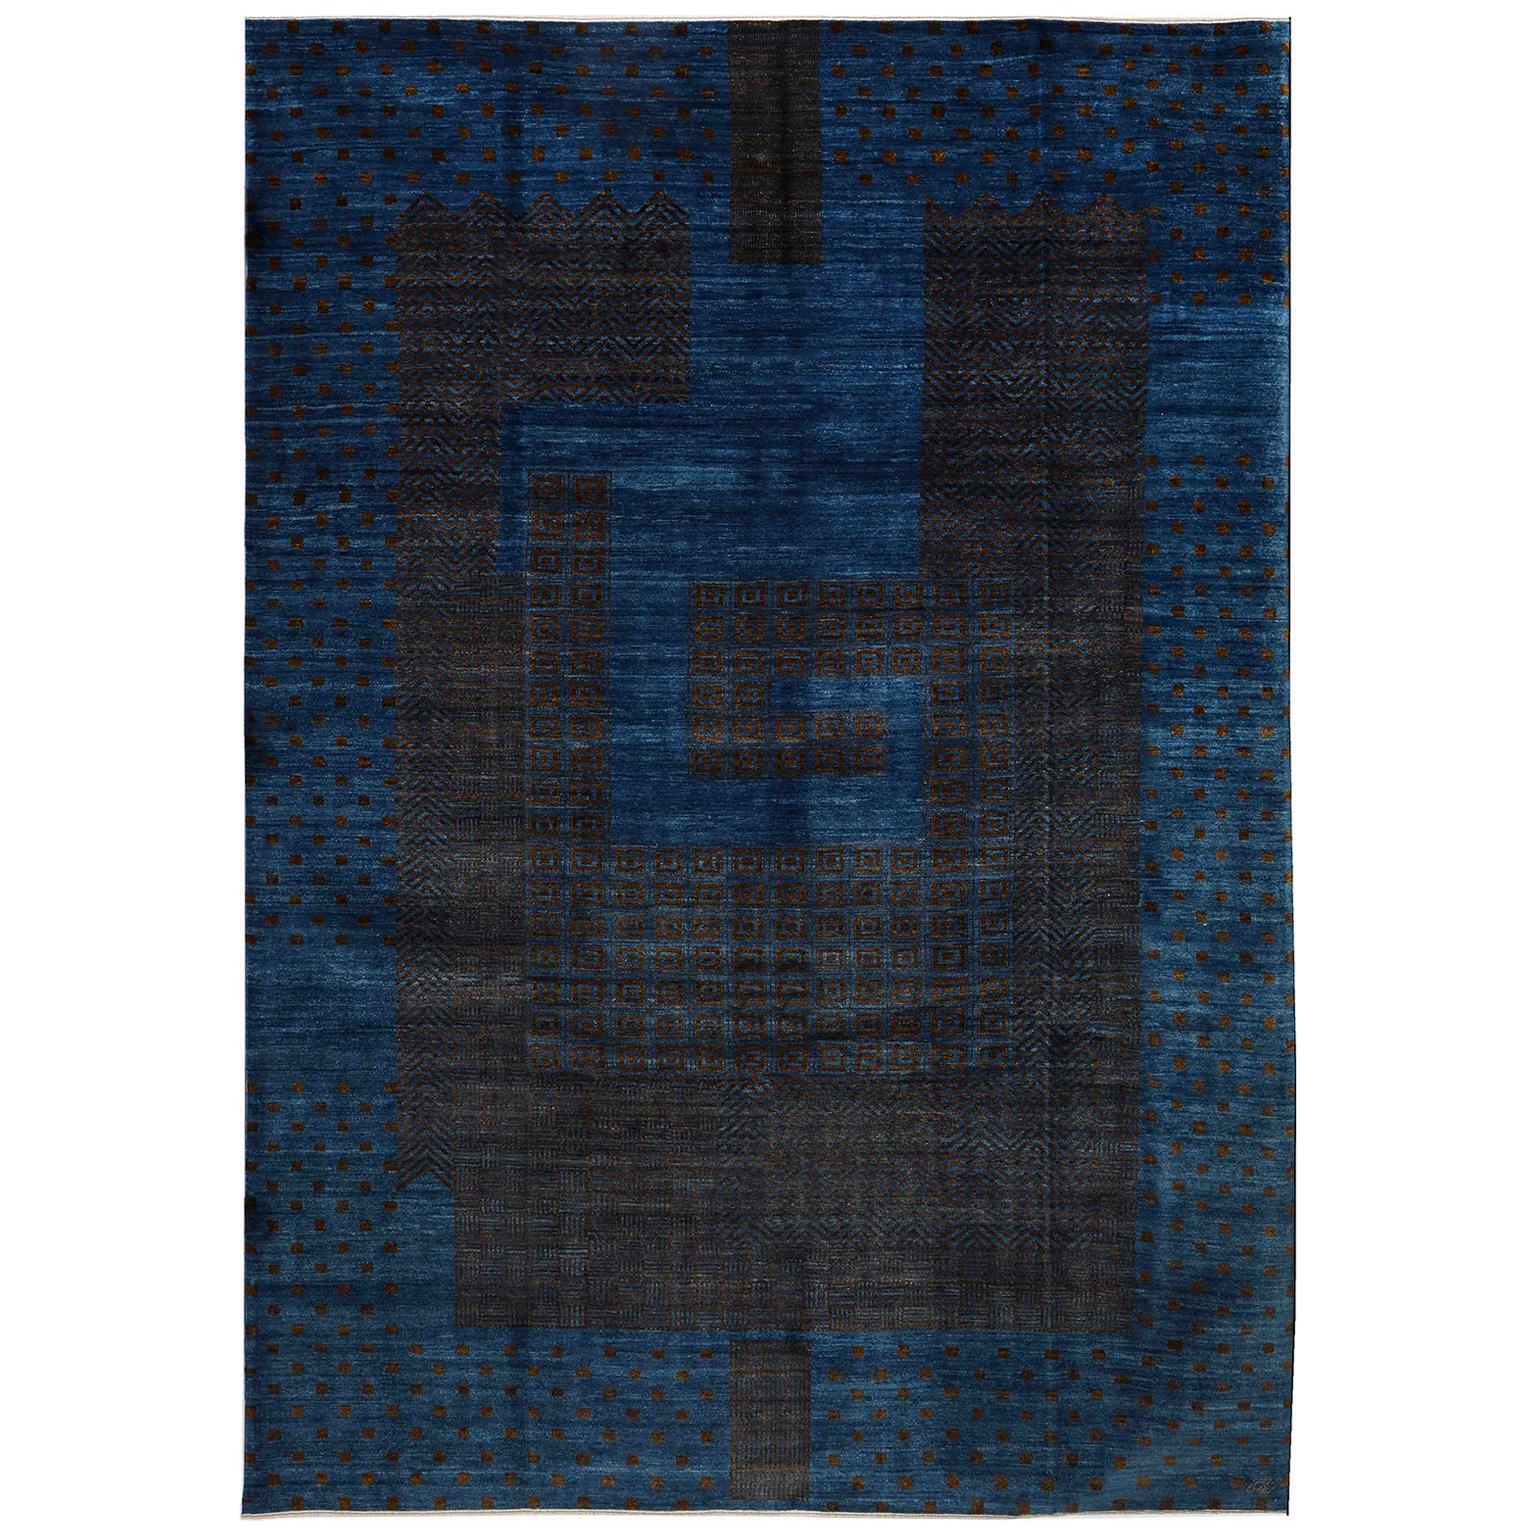 Orley Shabahang Contemporary Wool Persian Rug, Blue and Brown, 9' x 12' For Sale